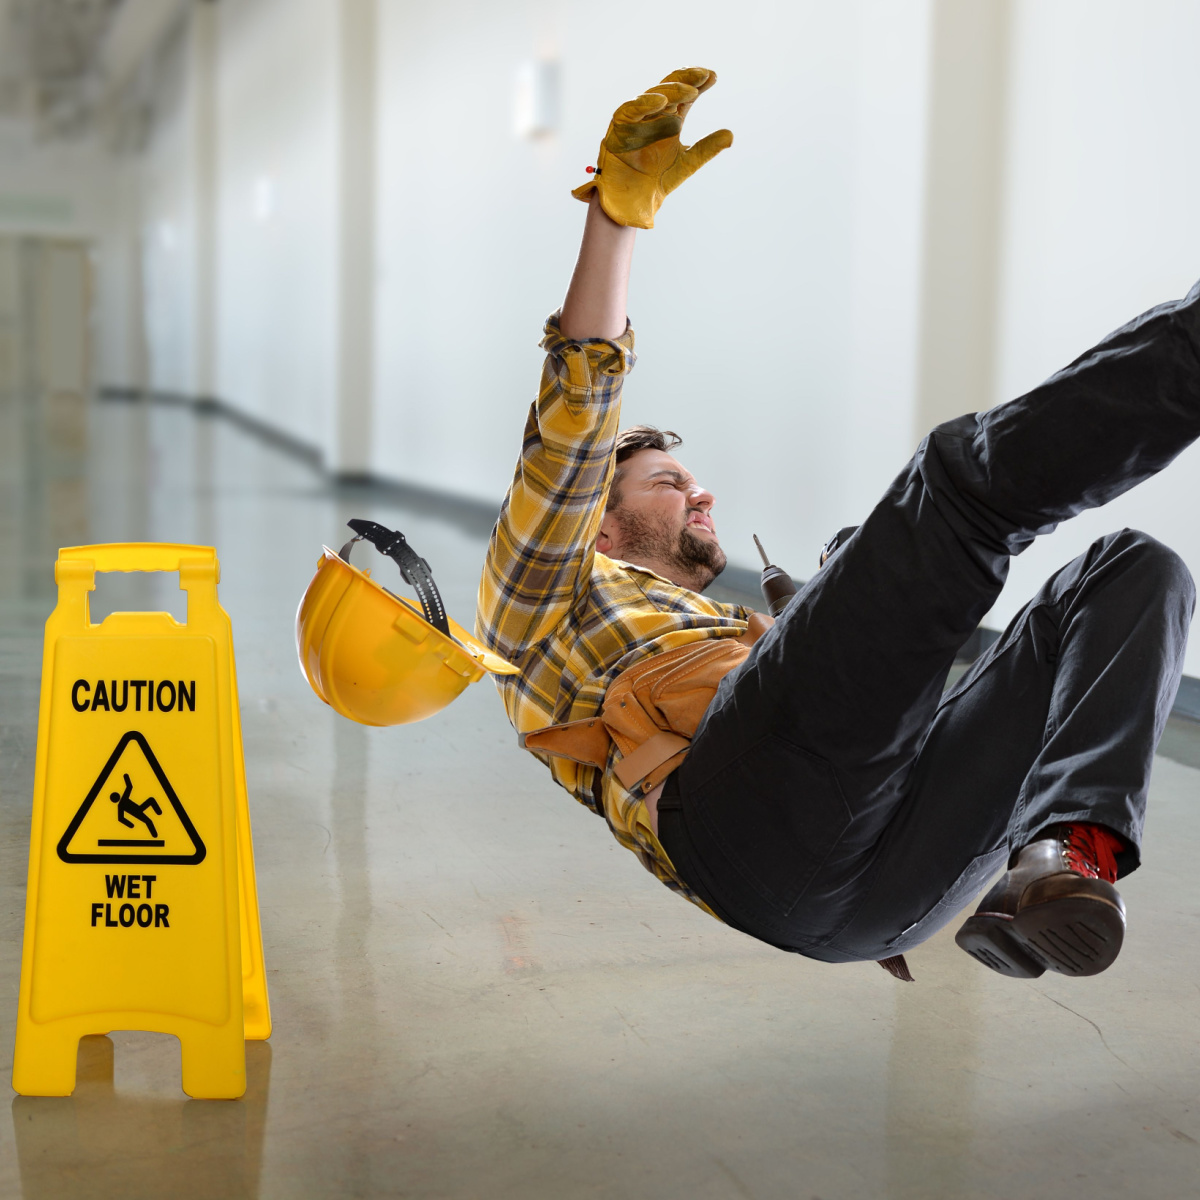 A worker slips and falls in the workplace, likely sustaining a Houston personal injury.